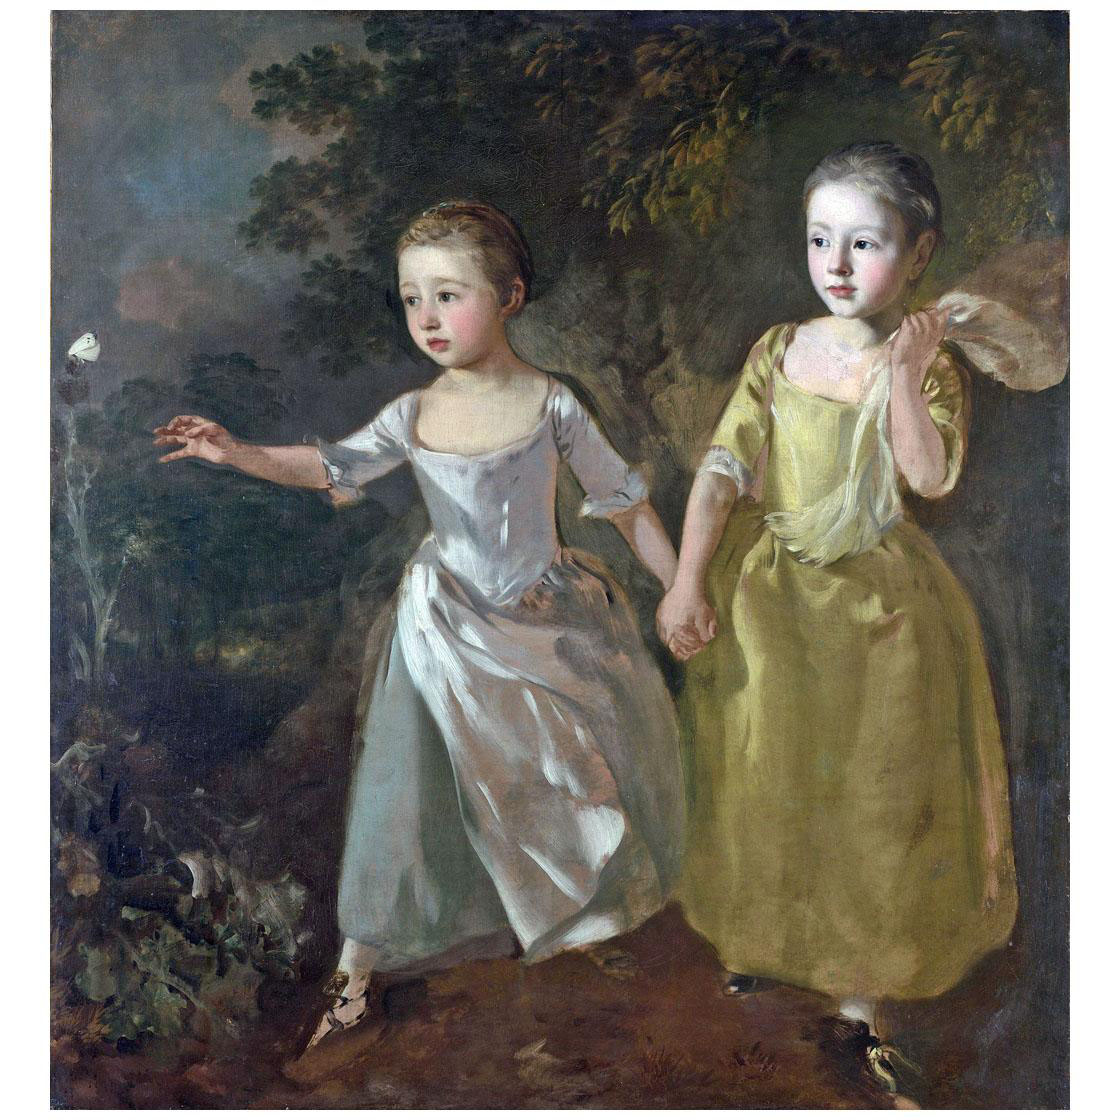 Thomas Gainsborough. The Painter’s Daughters with a Butterfly. 1756. National Gallery London